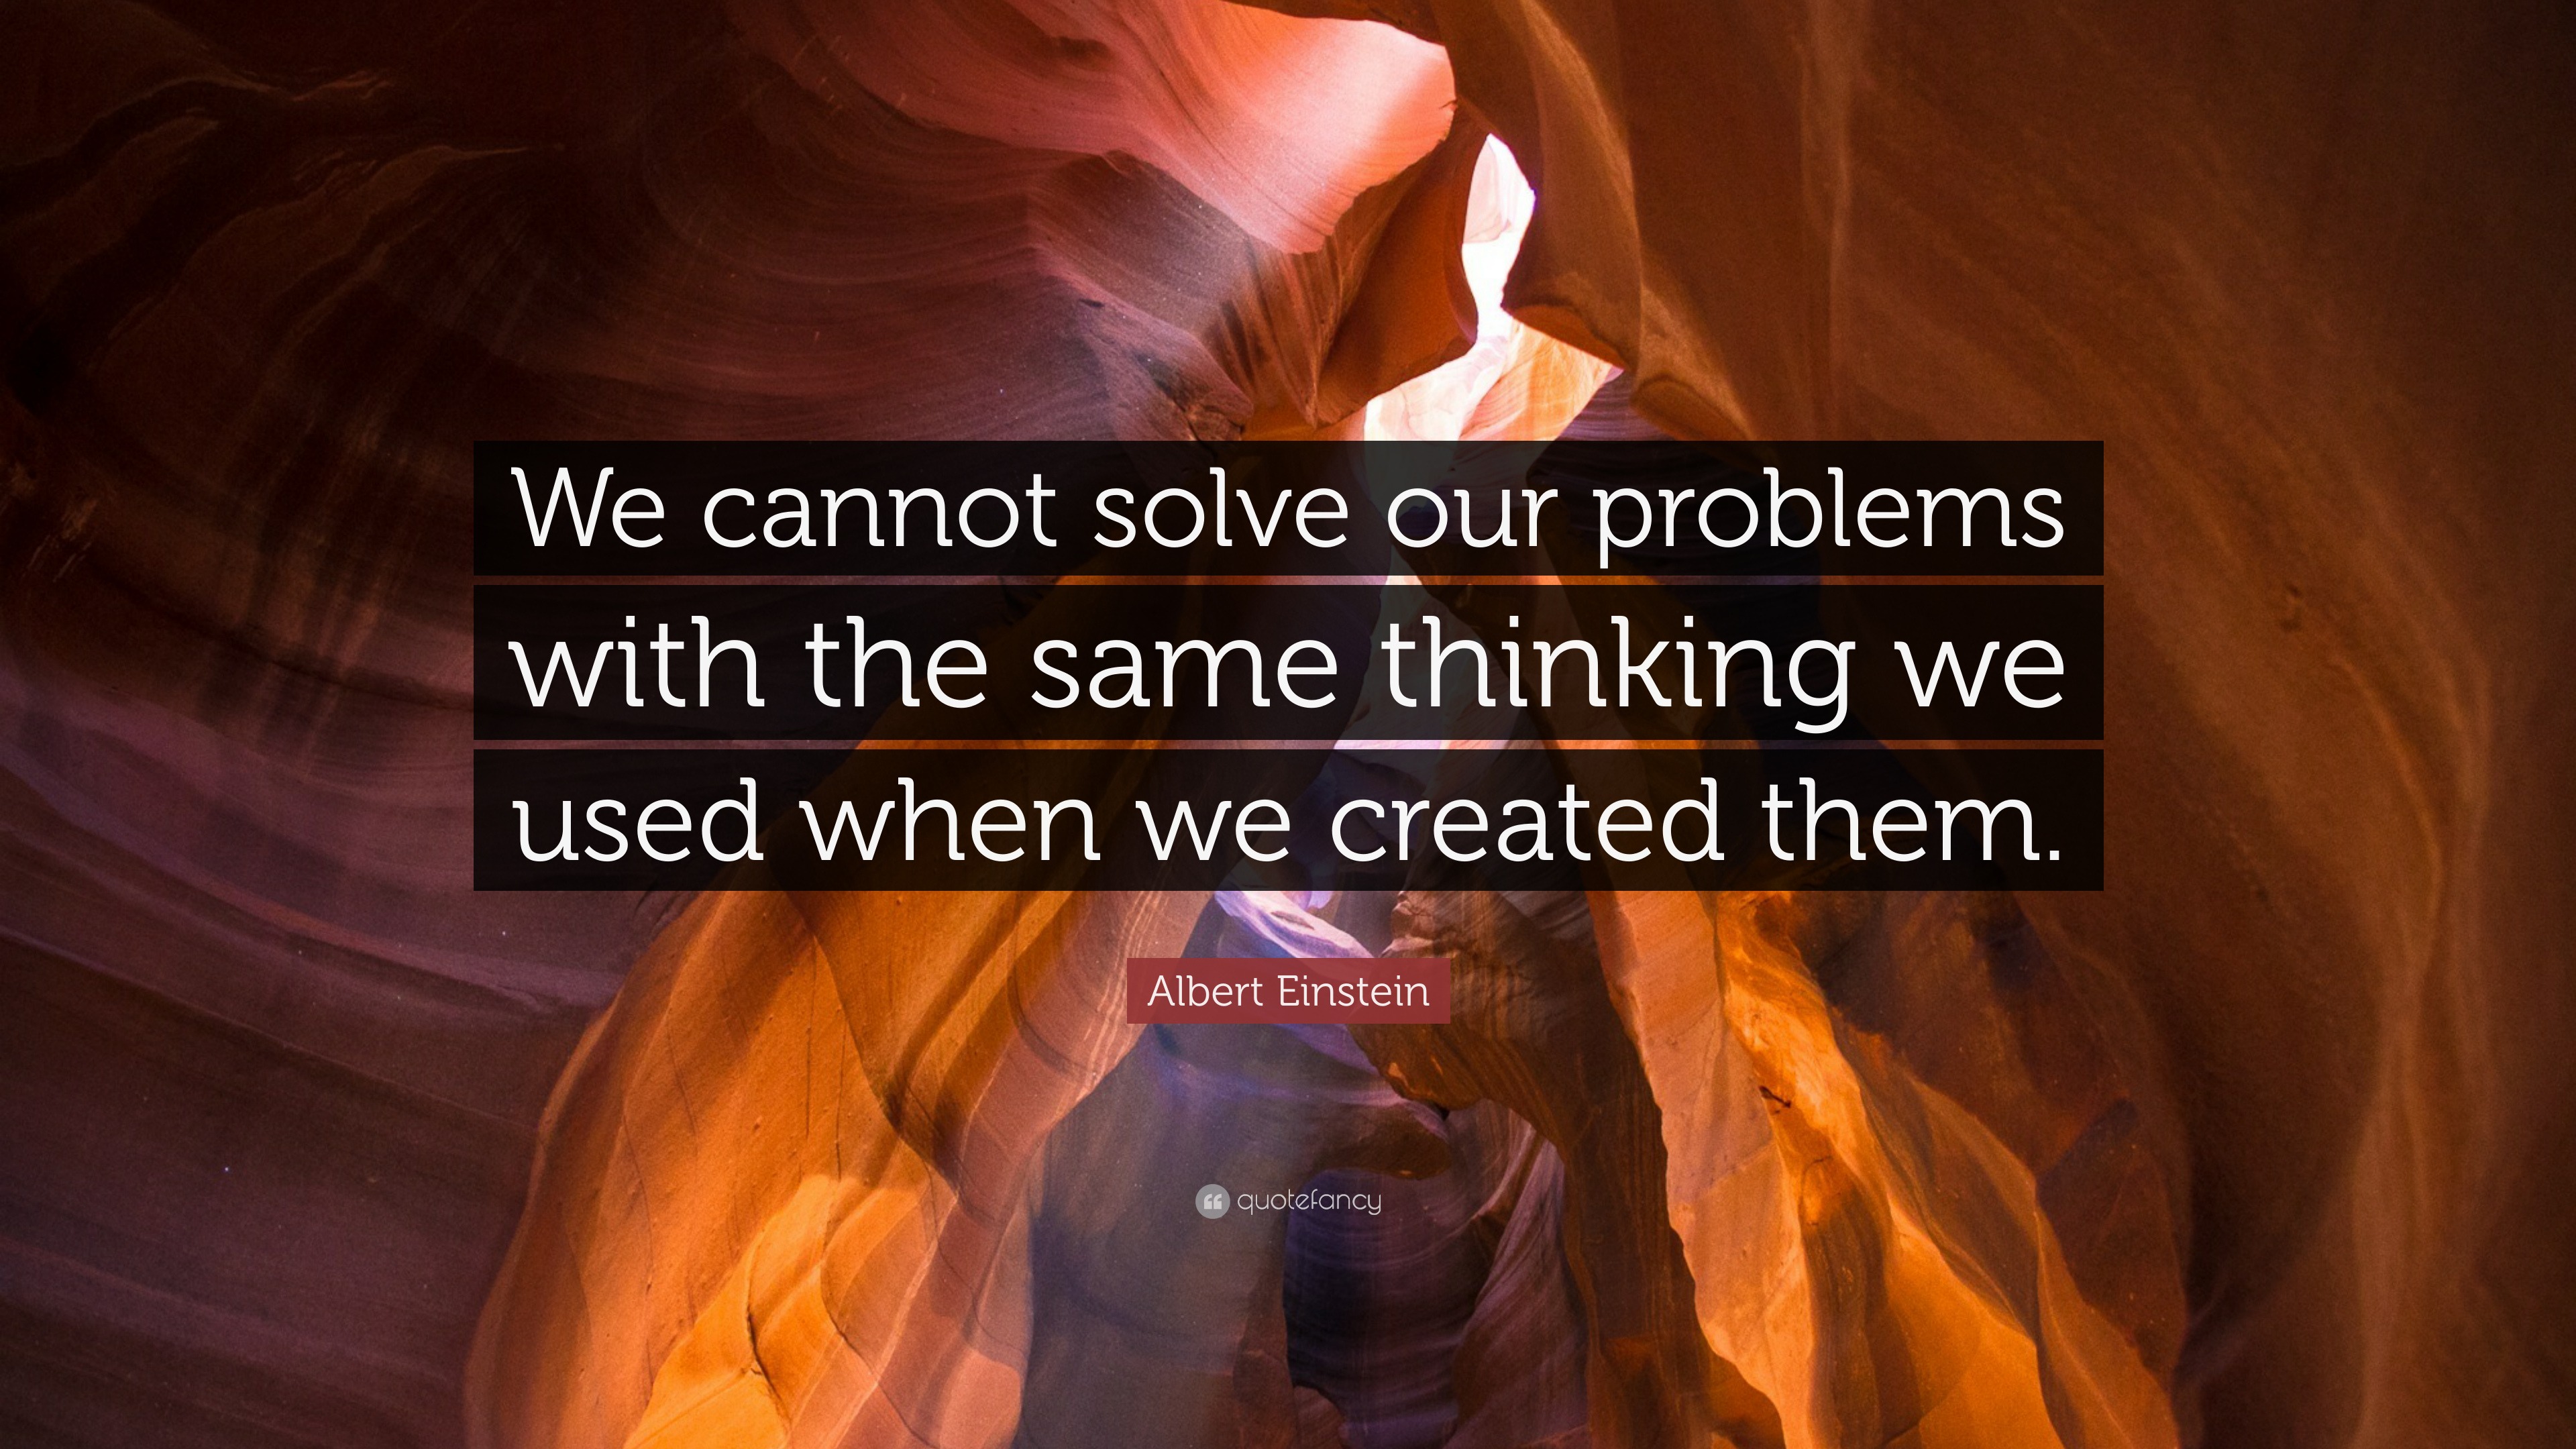 we cannot solve problems with the same thinking